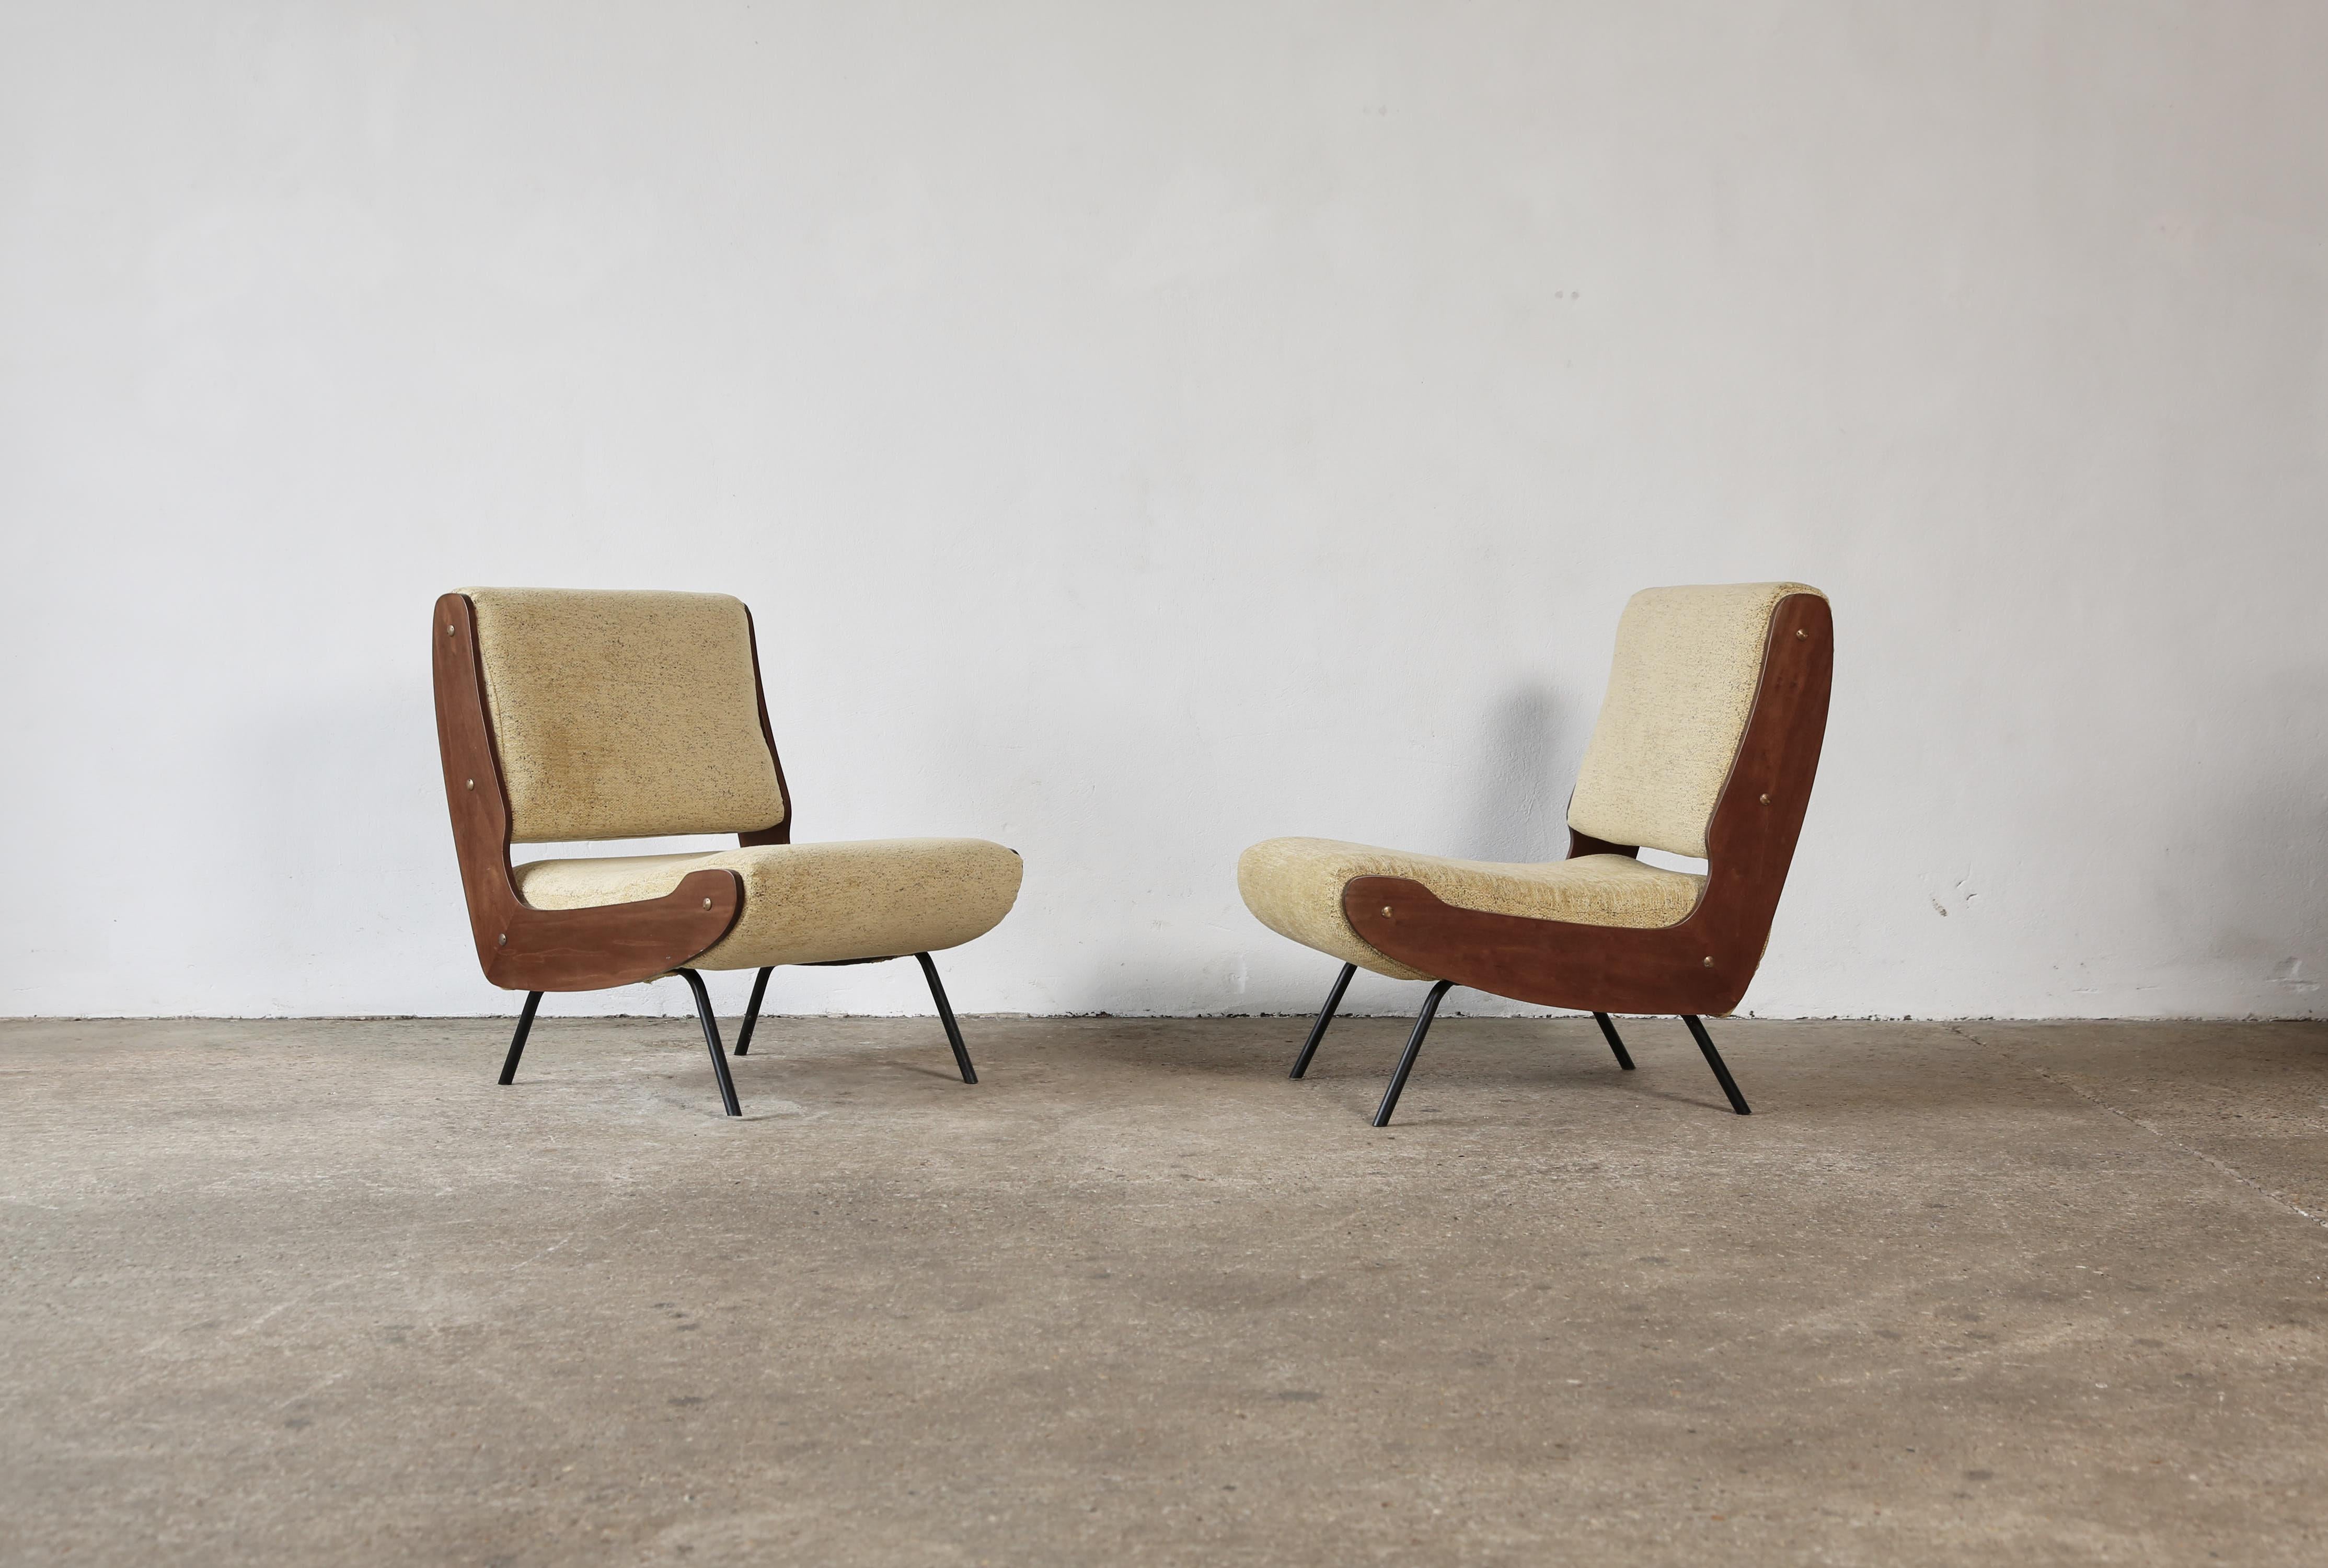 A rare pair of lounge chairs by Gianfranco Frattini, produced by Cassina, Italy, 1950s.  In good original condition - wooden frames and original upholstery.   Fast shipping worldwide.
  


UK customers please note: Prices do not include VAT.